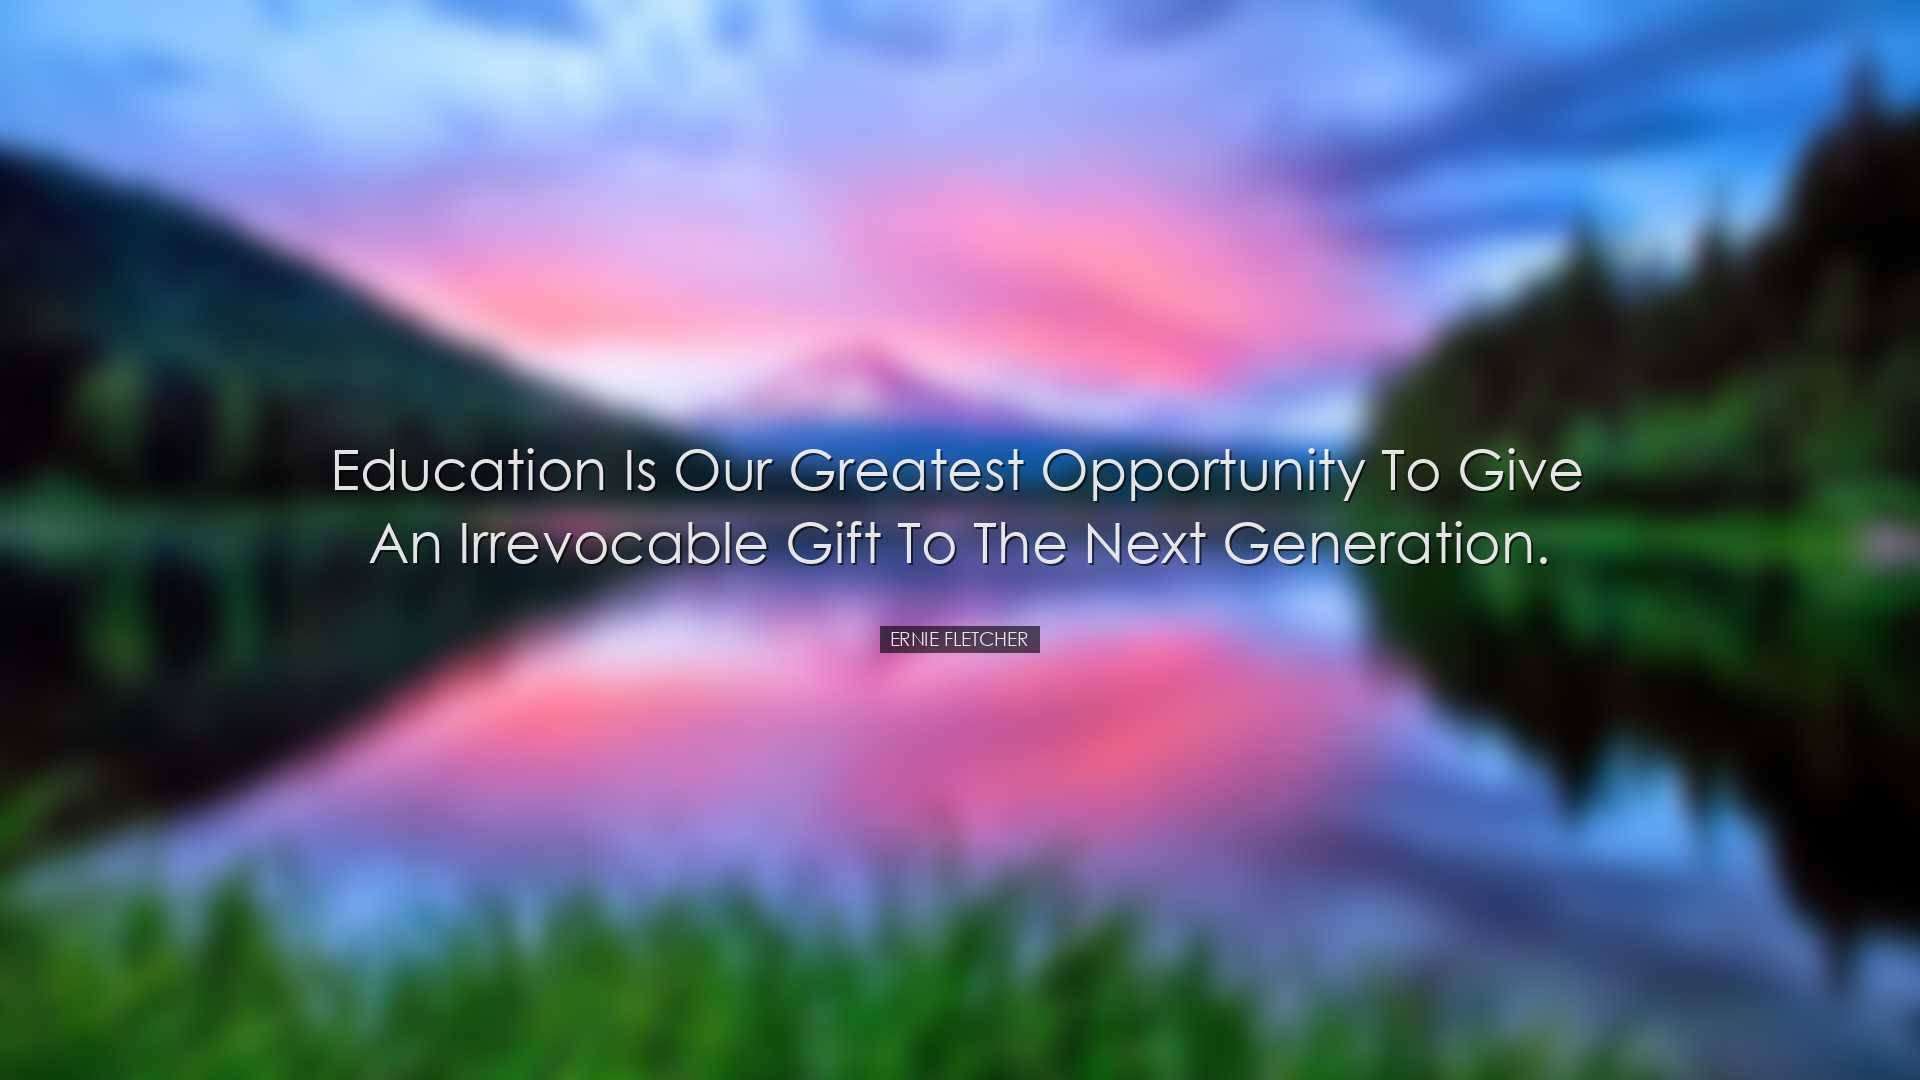 Education is our greatest opportunity to give an irrevocable gift